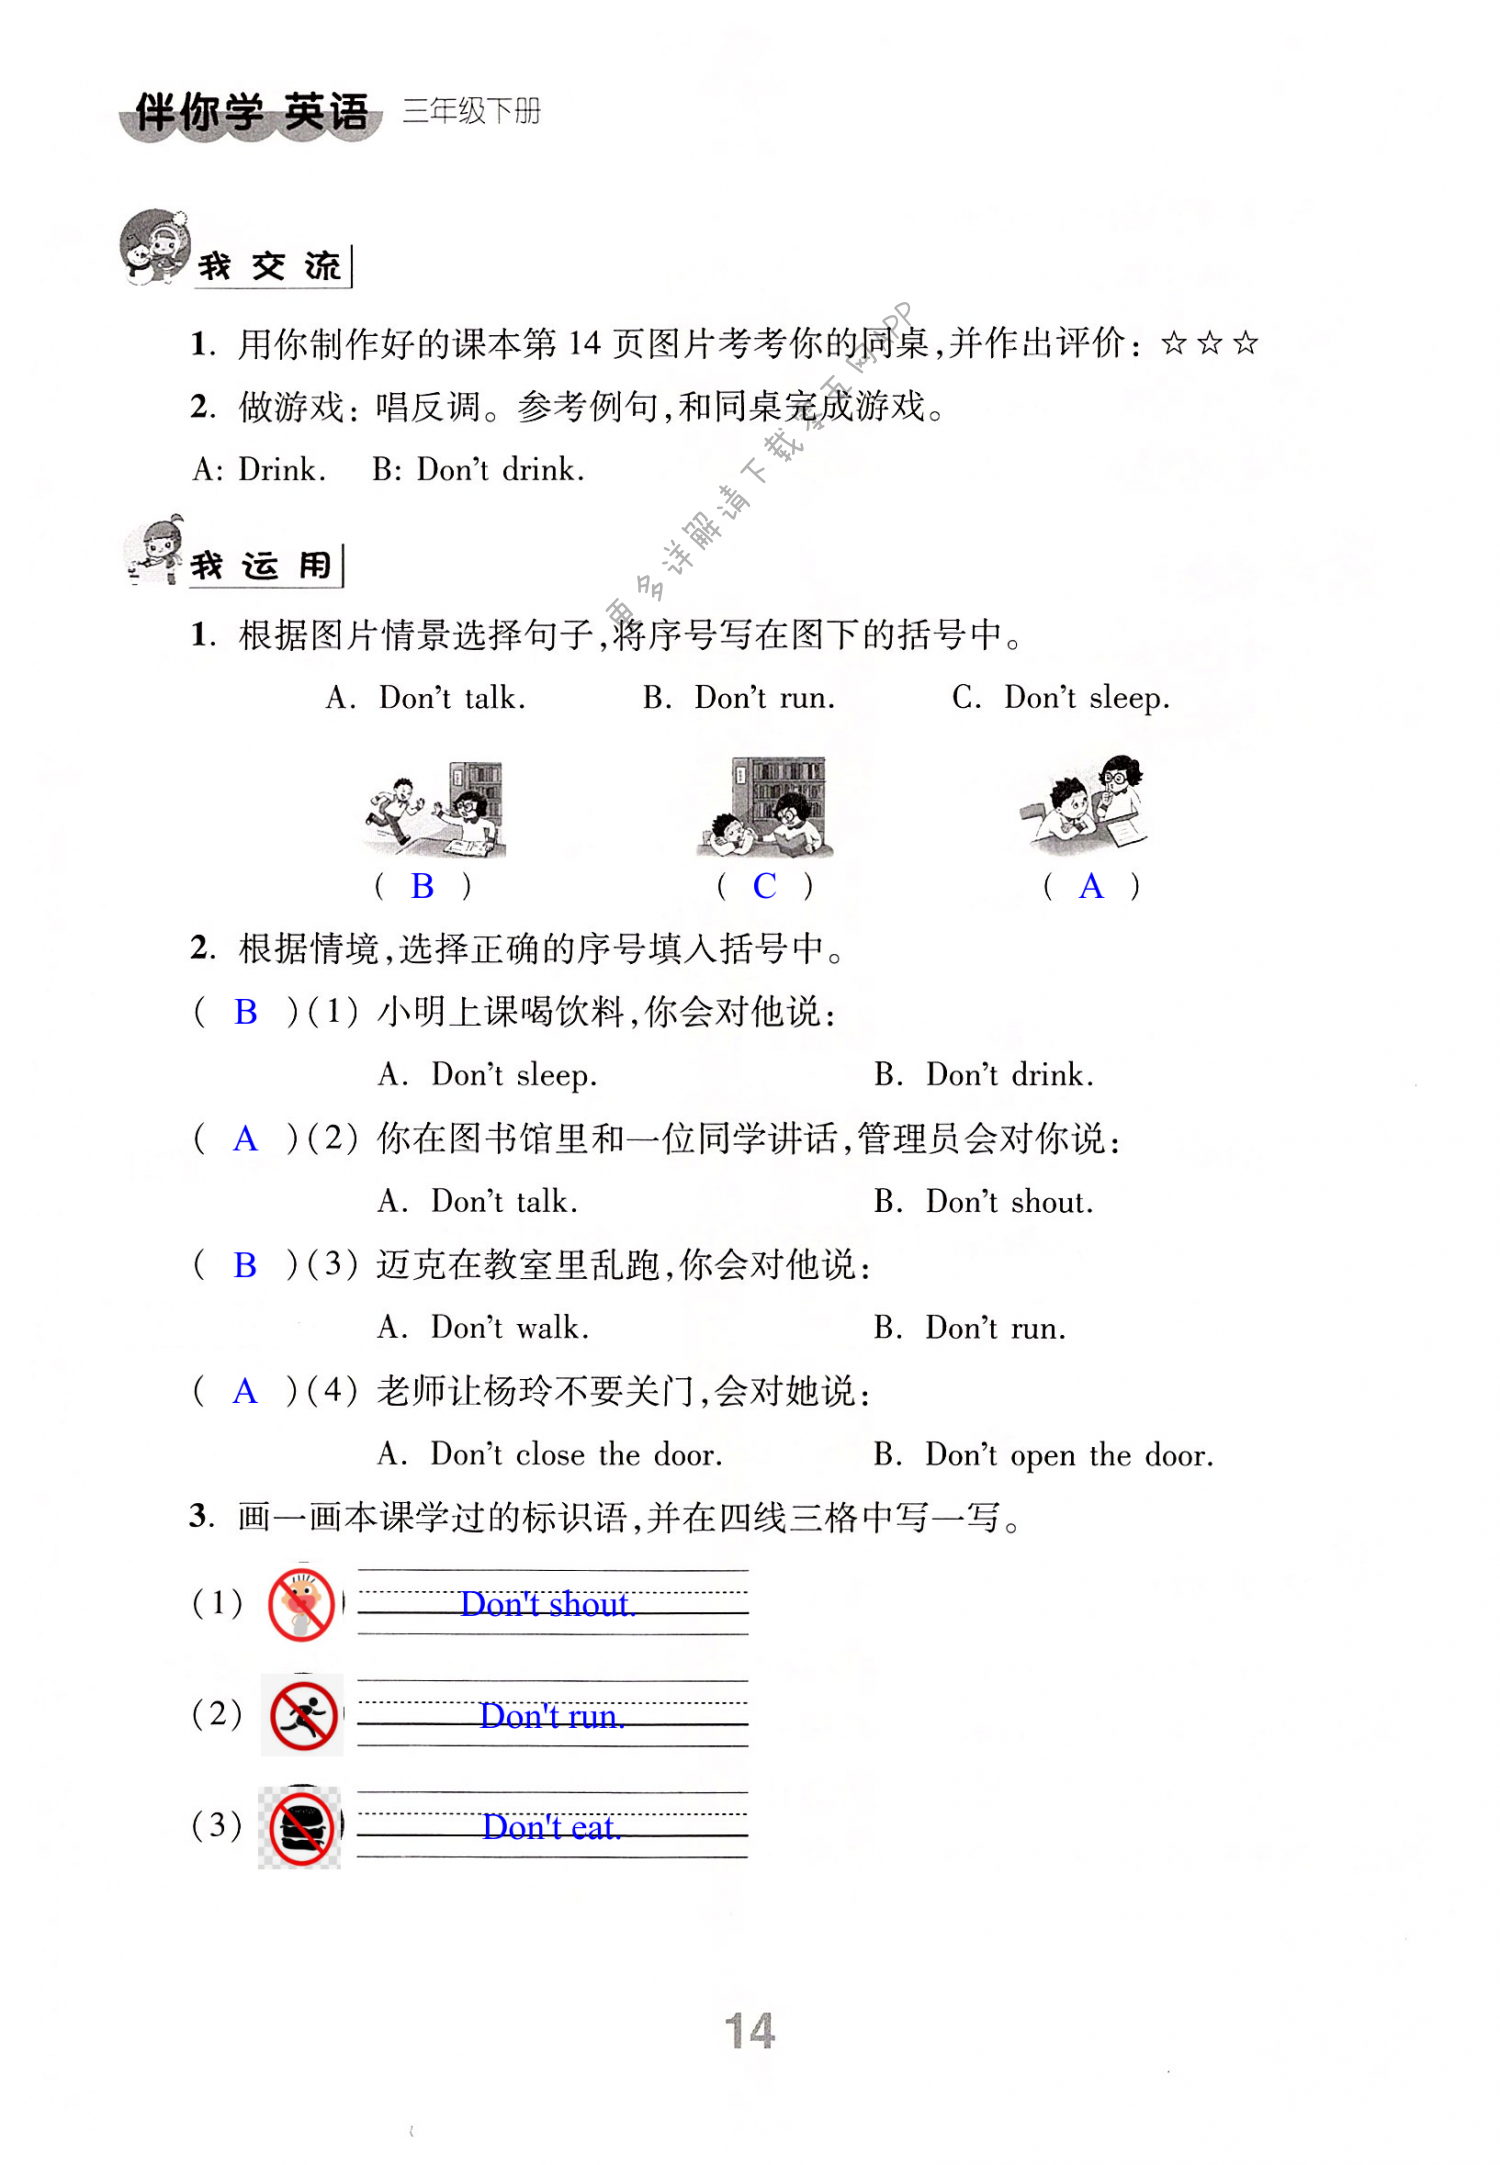 Unit 2 In the library - 第14页